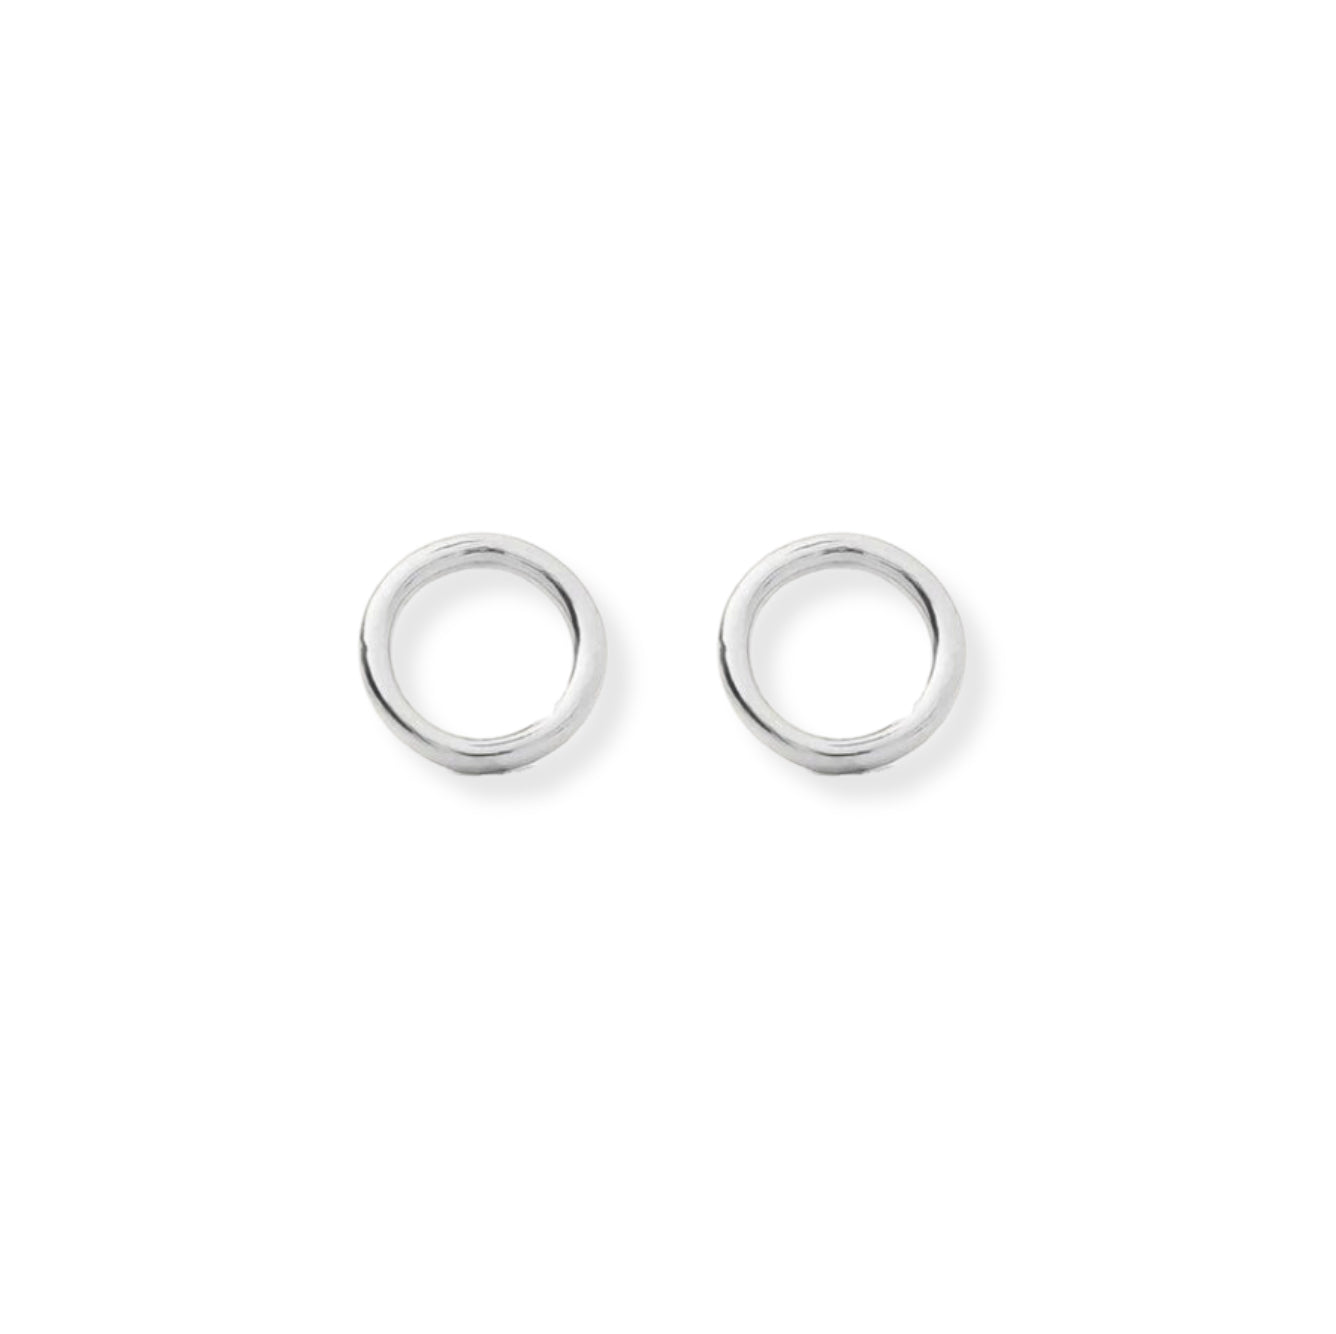 Circle Silhouette Gold Studs - Le Serey